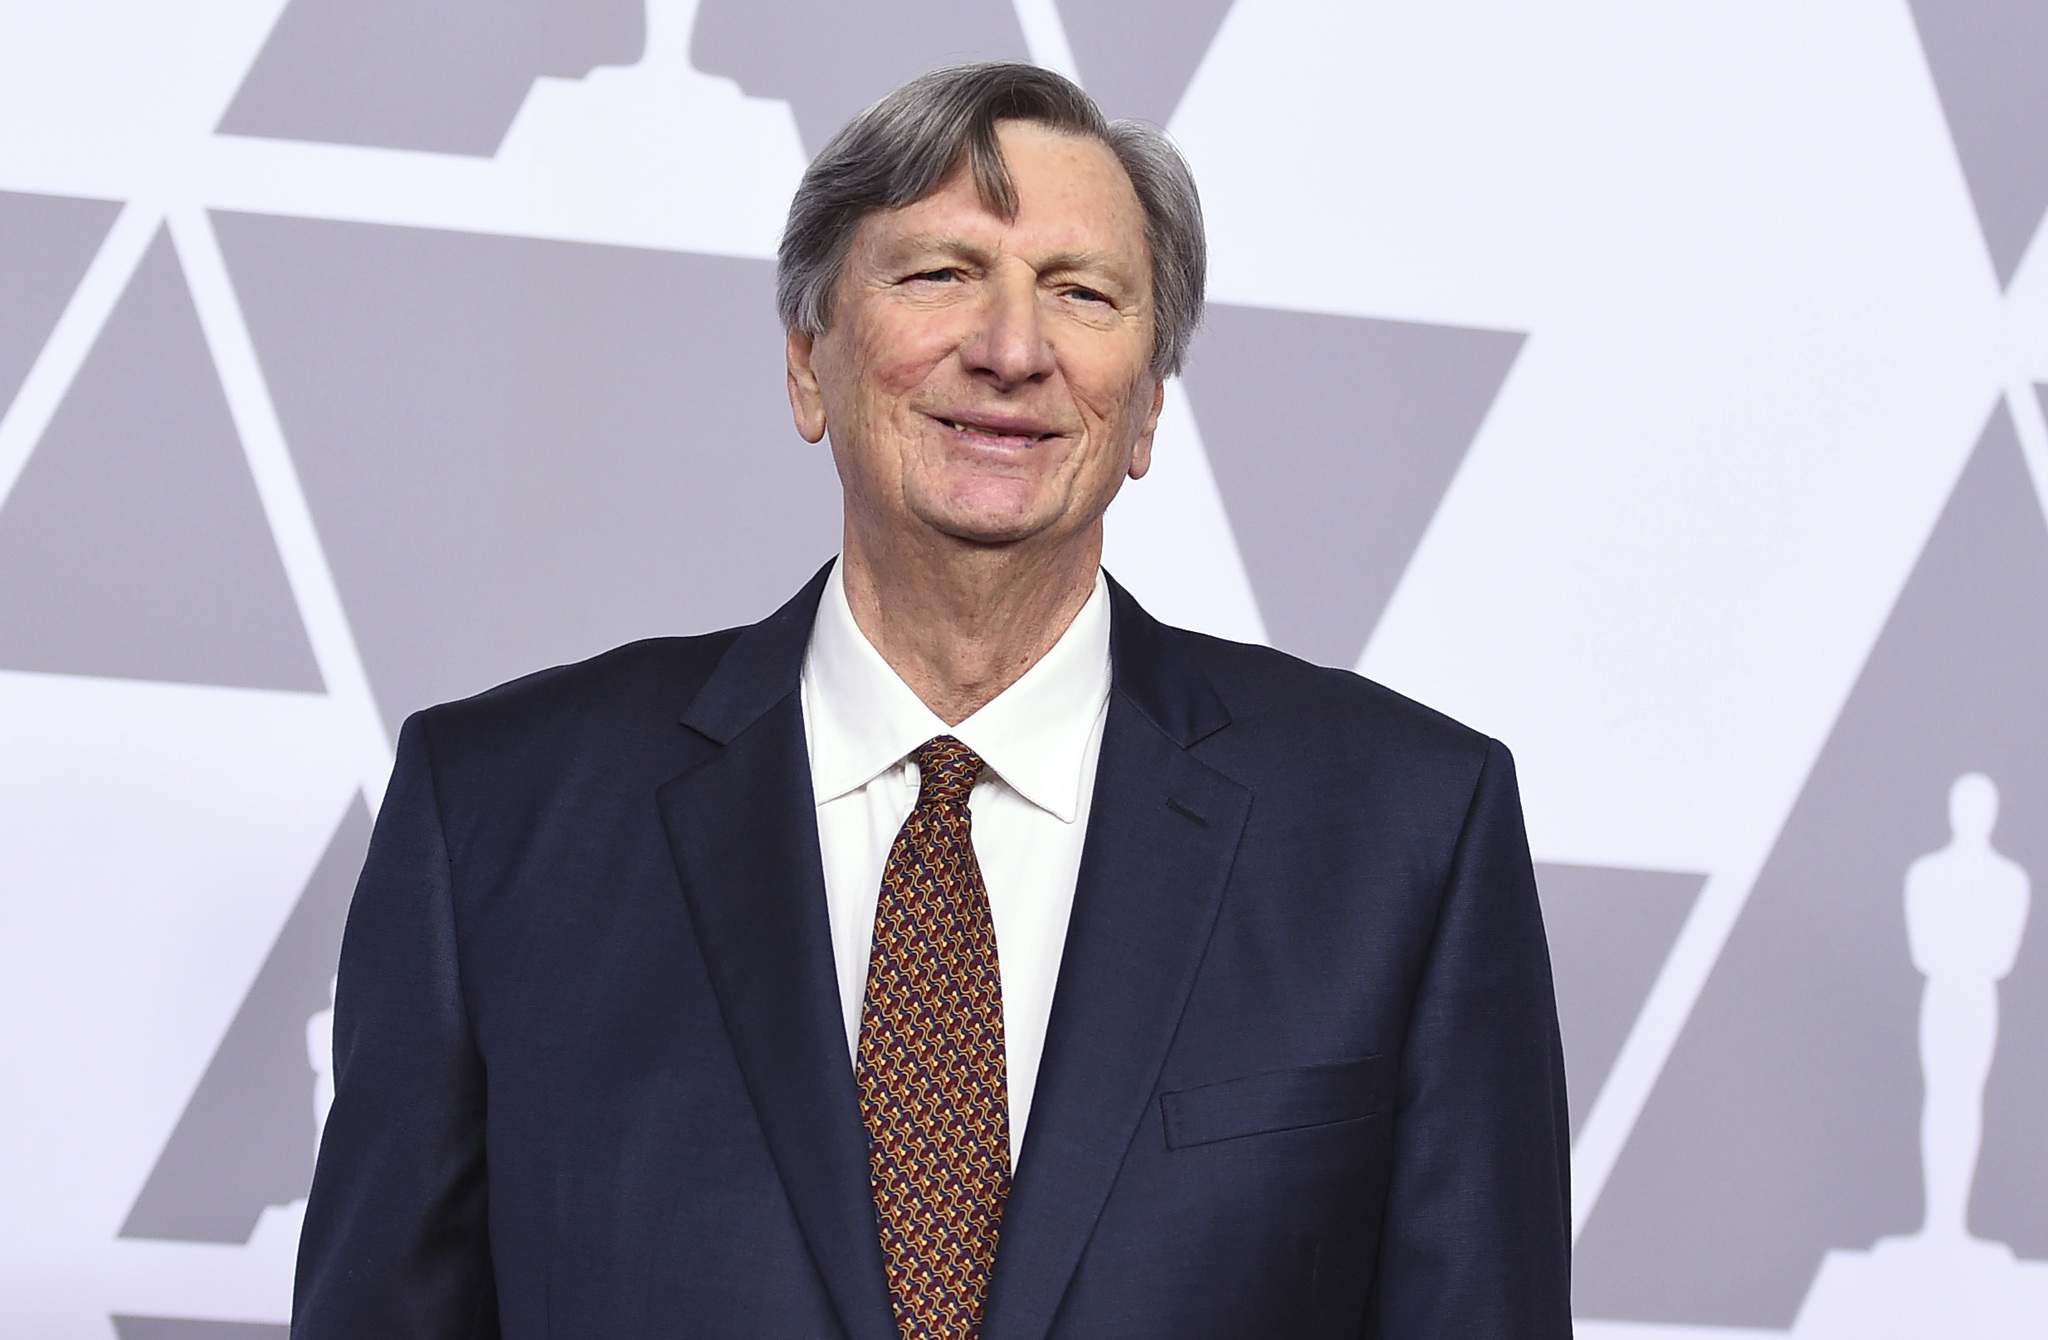 John Bailey arrives at the 90th Academy Awards Nominees Luncheon.